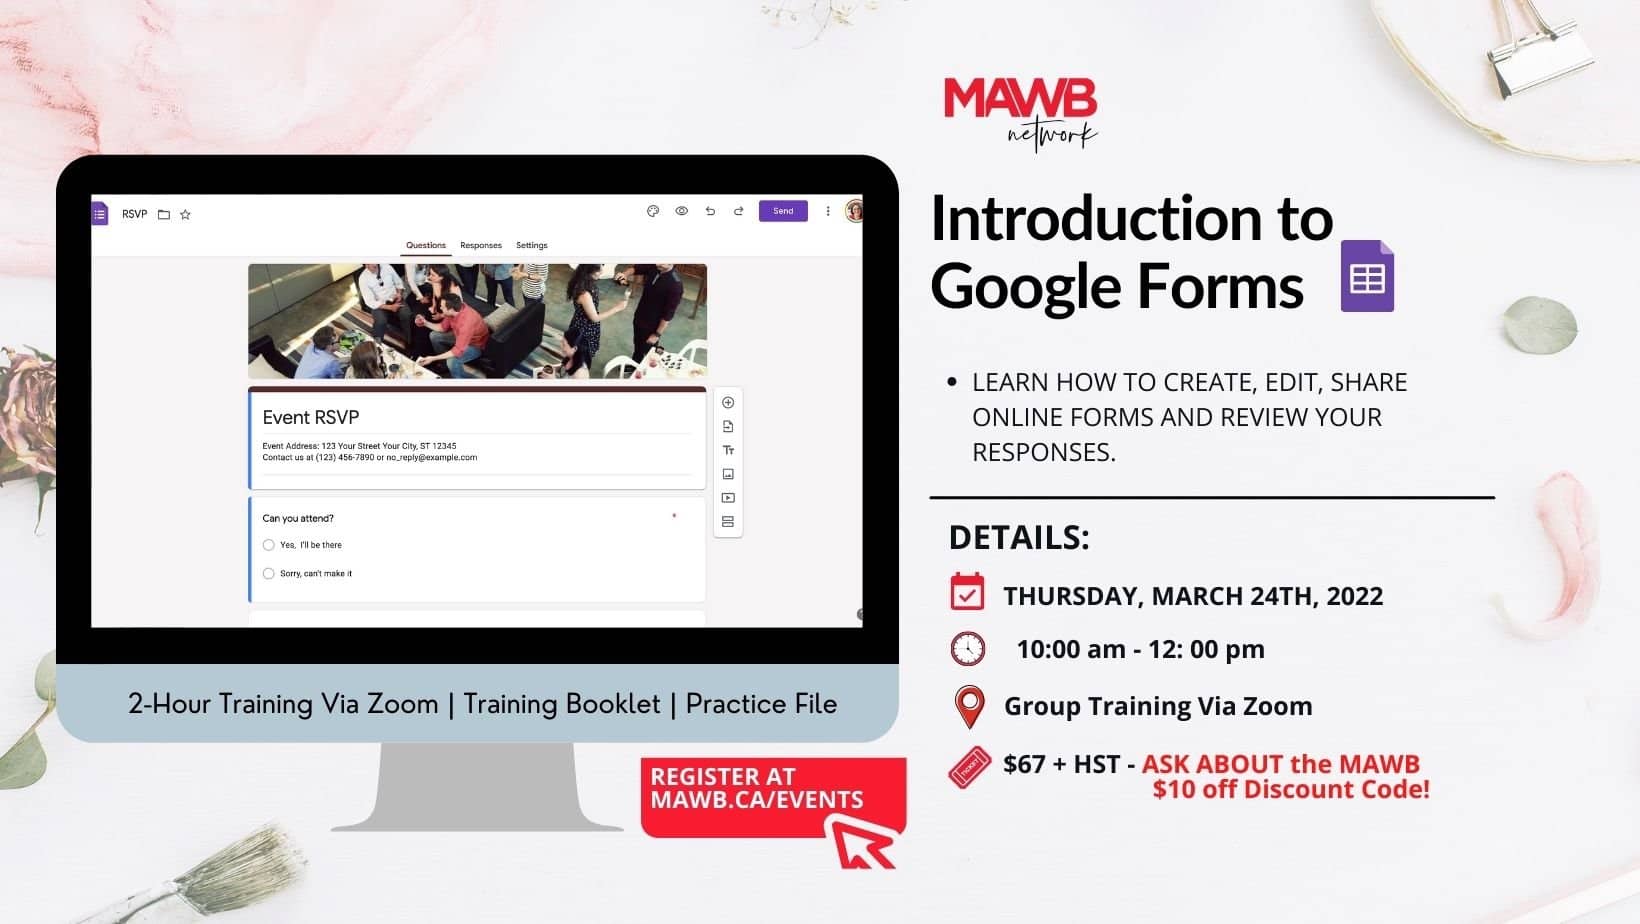 Introduction to Google Forms